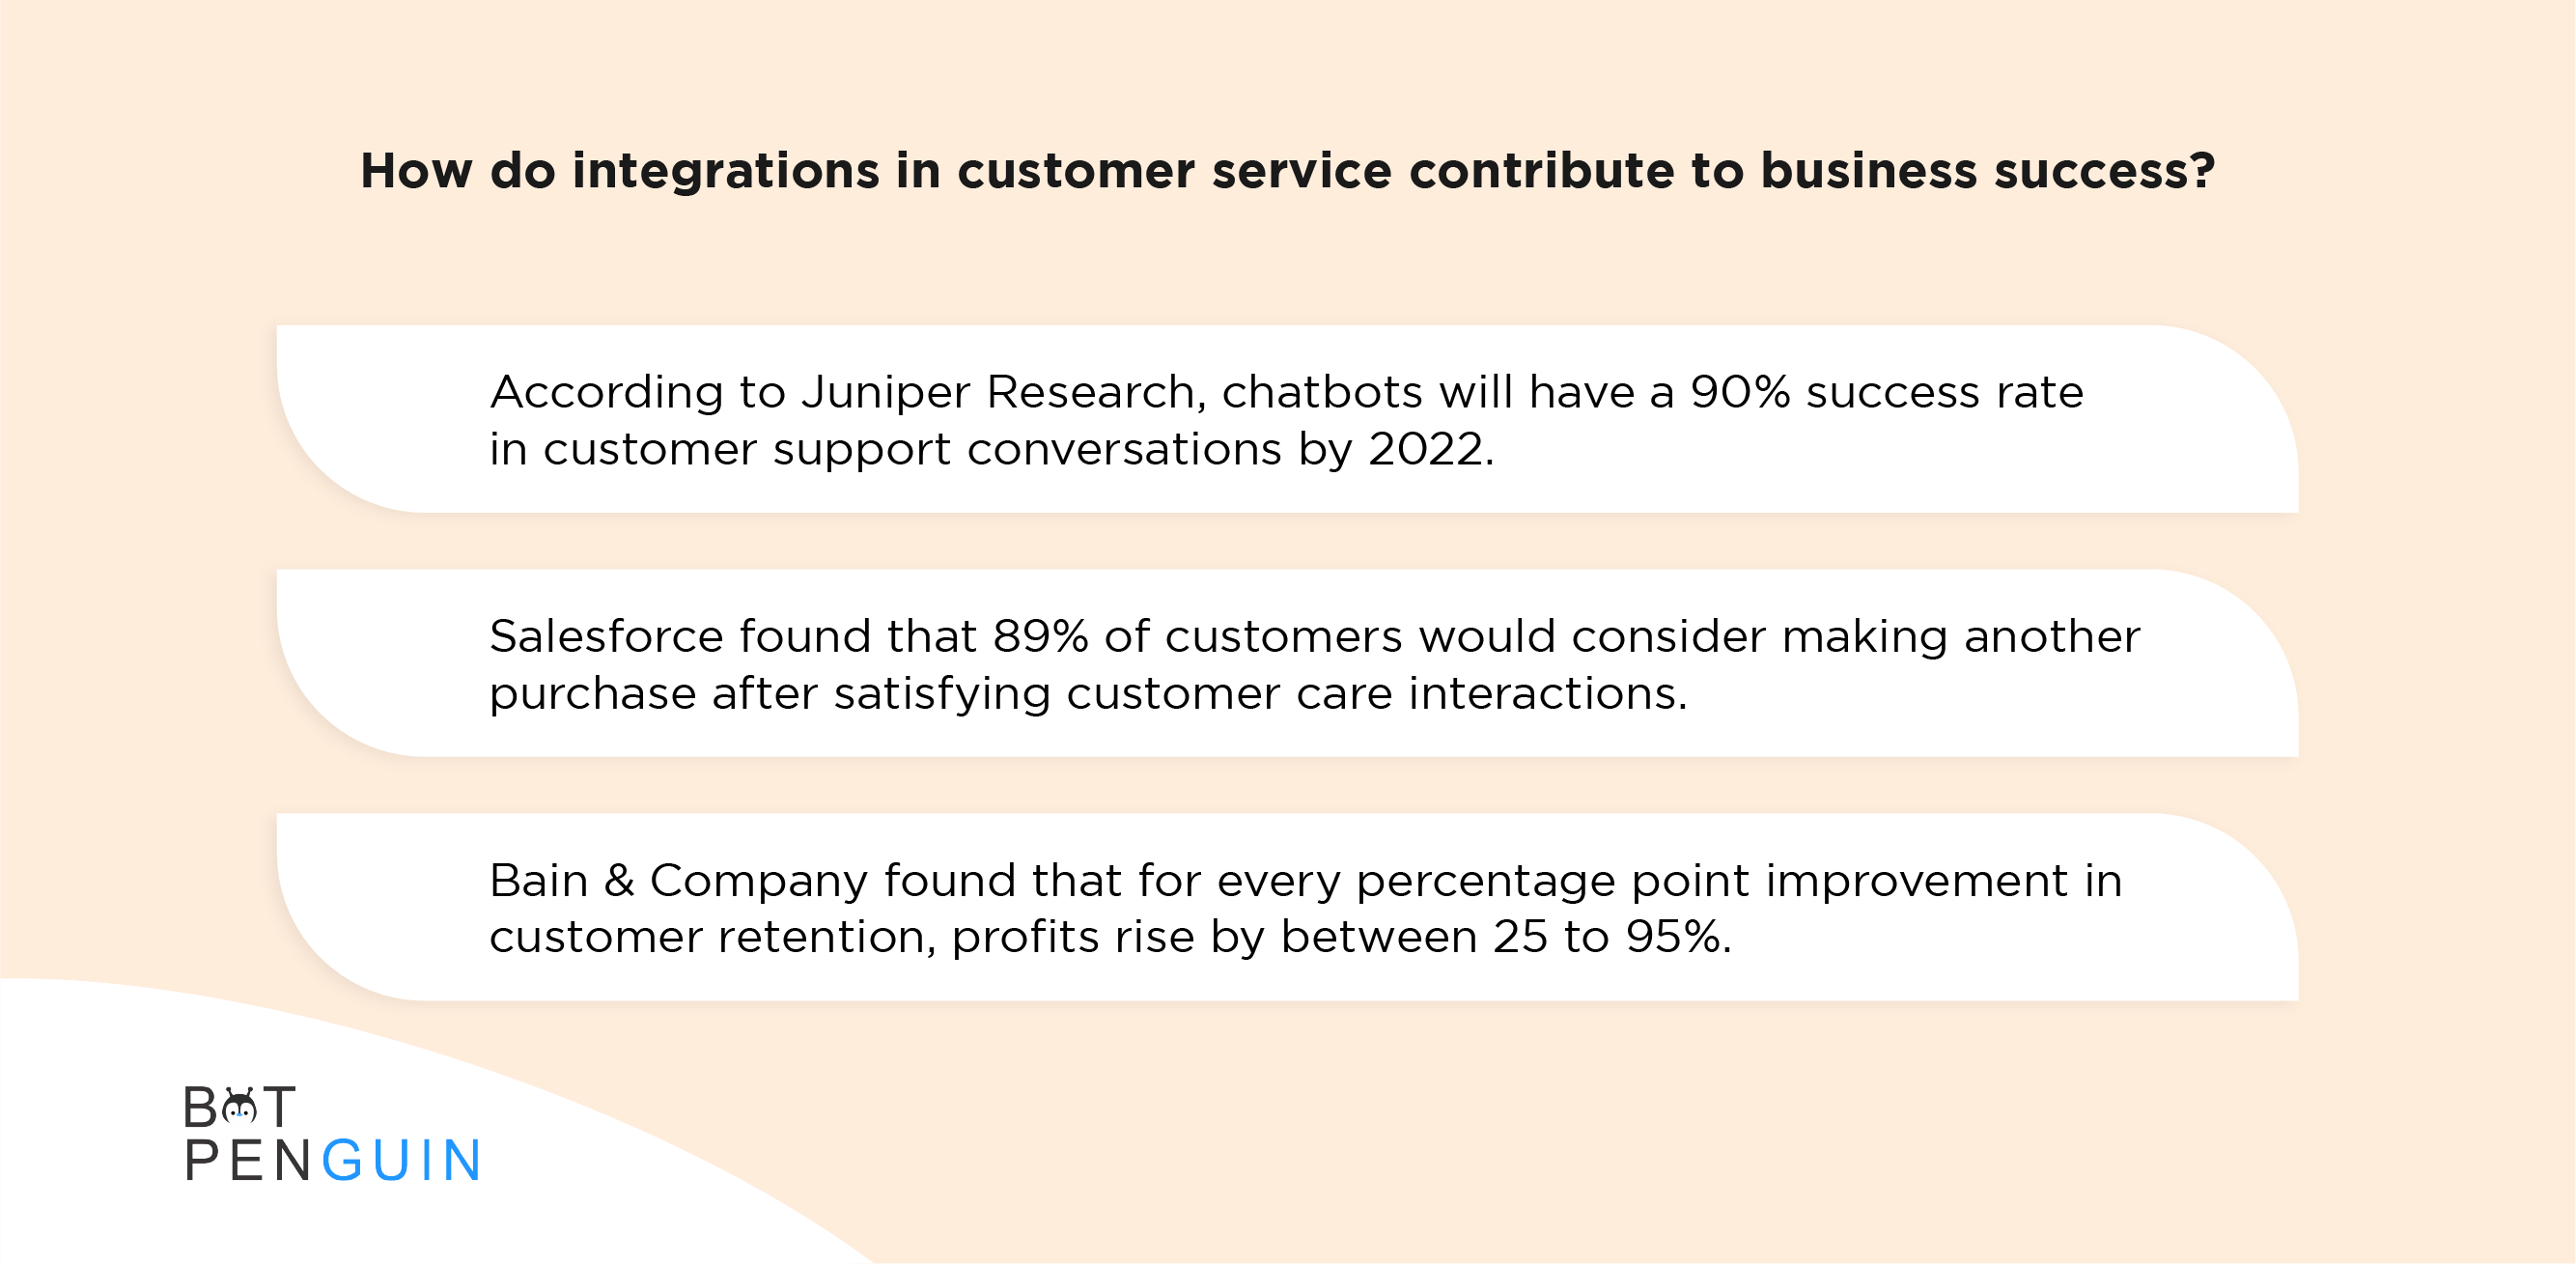 How do integrations in customer service contribute to business success?